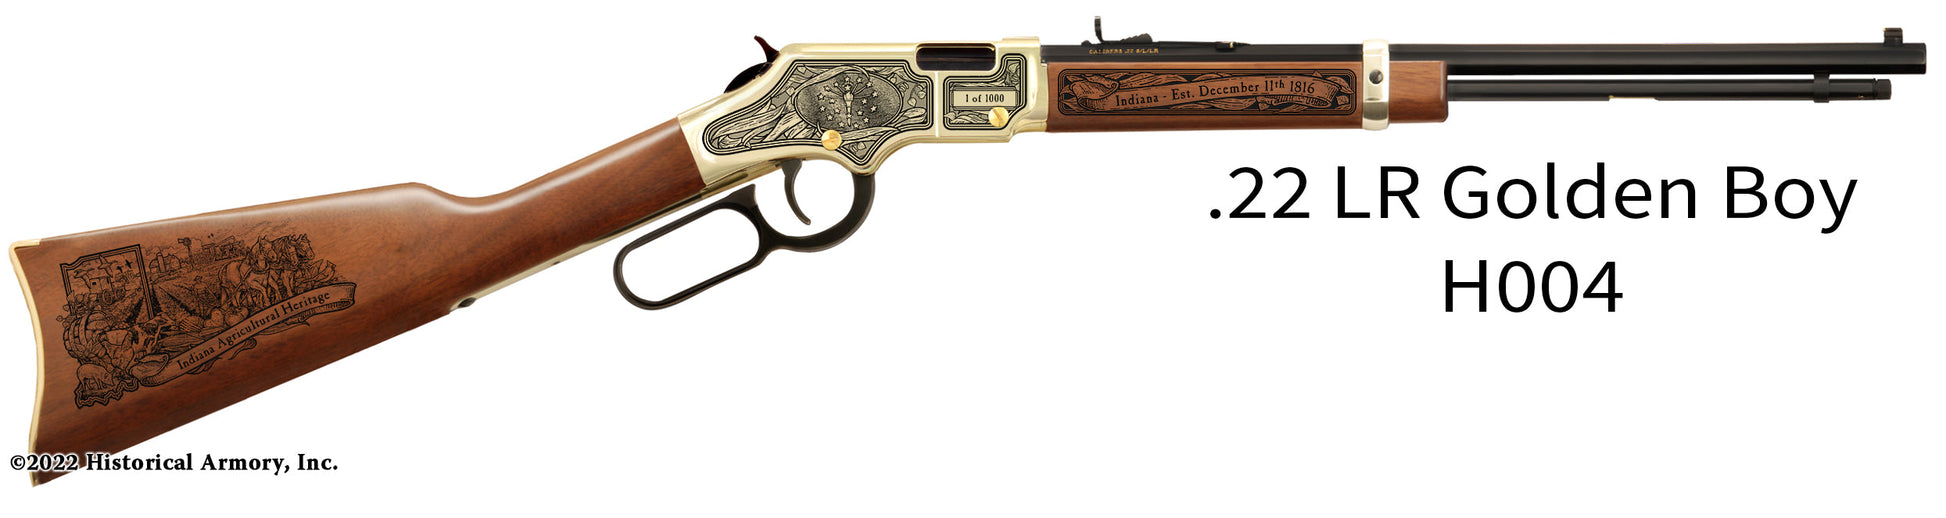 Indiana State Agricultural Heritage Engraved Golden Boy Rifle